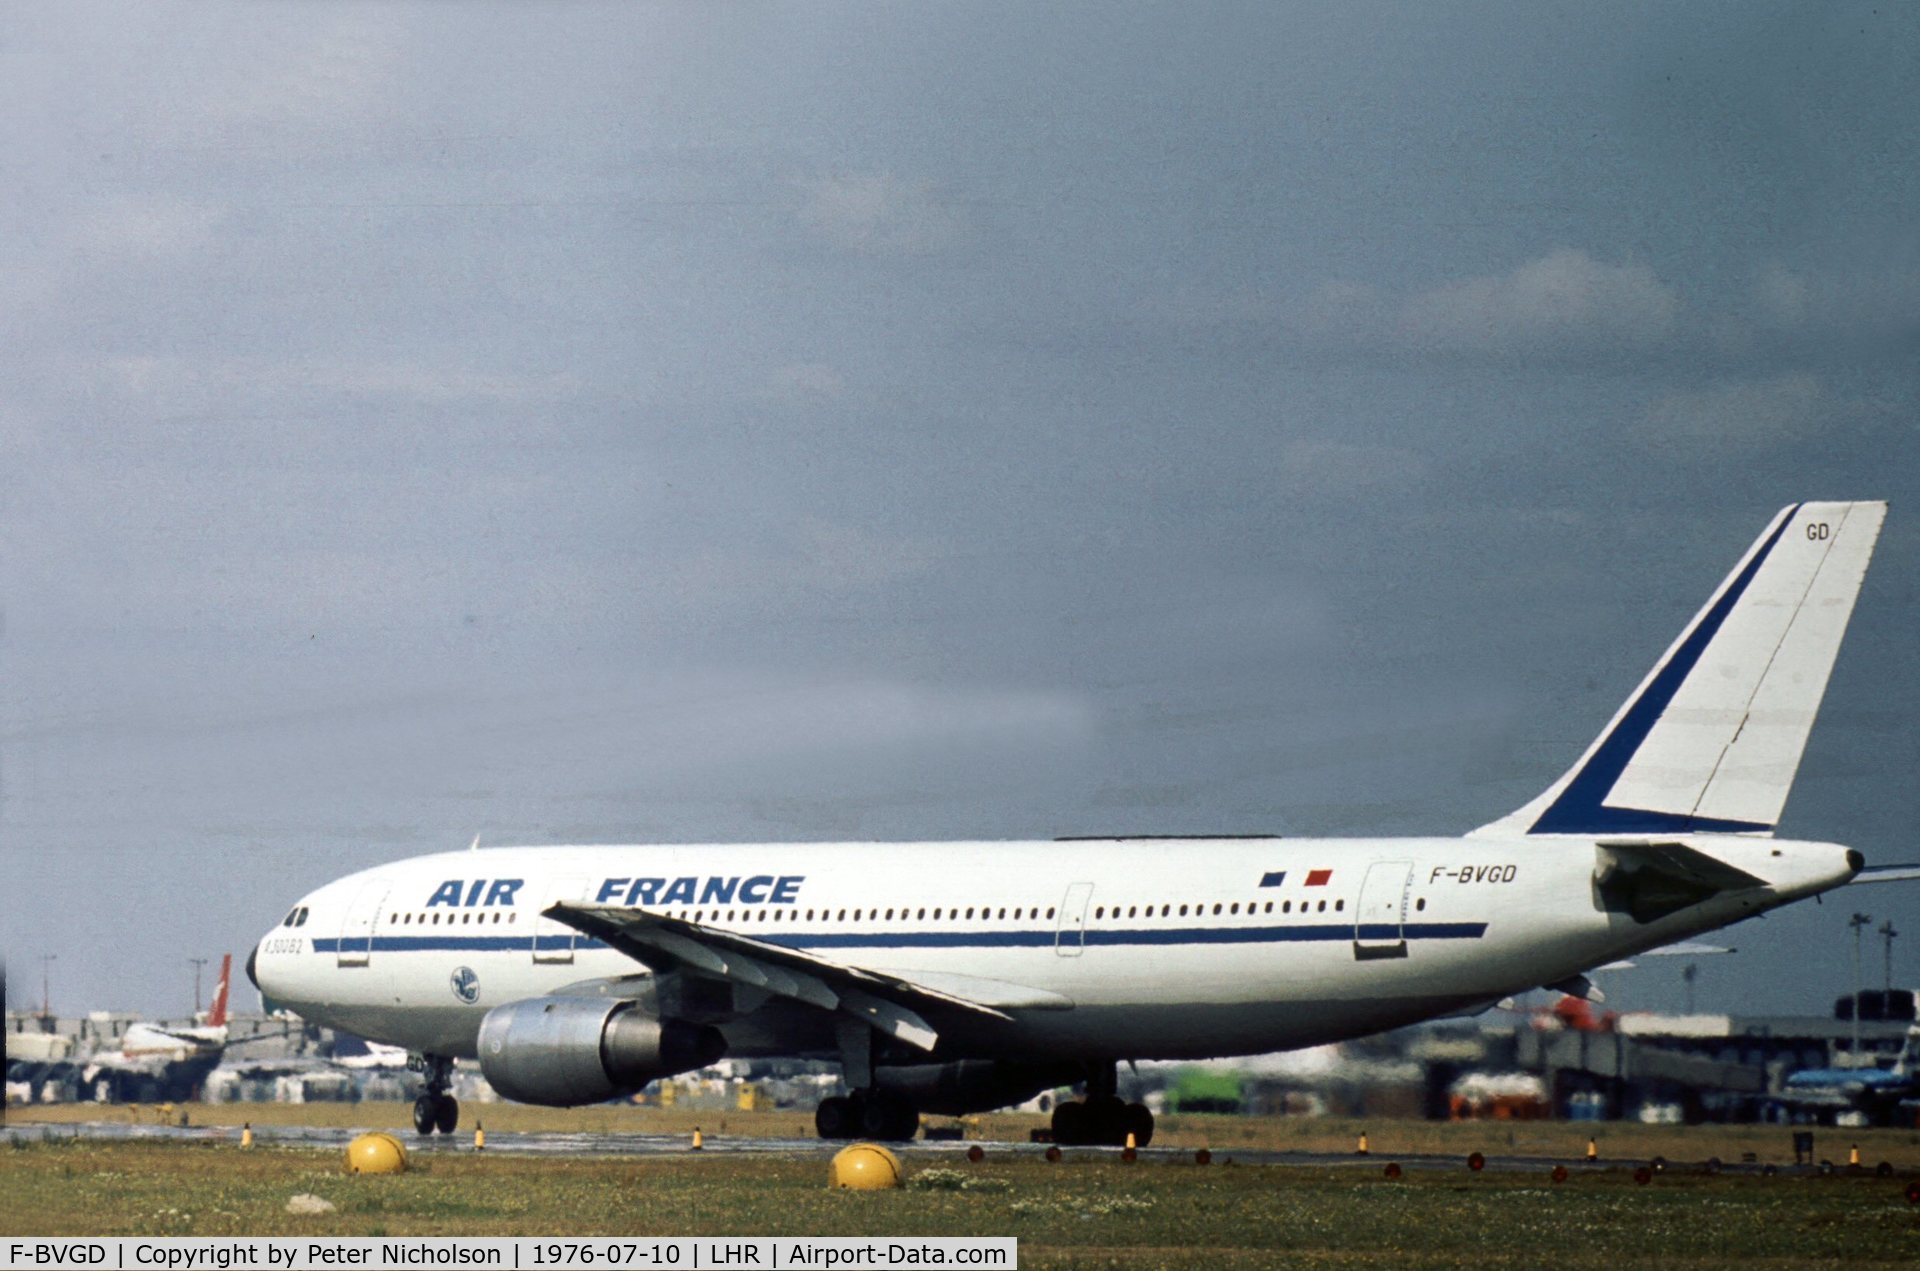 F-BVGD, 1975 Airbus A300B2-1C C/N 10, Operated by Air France and seen departing from London Heathrow.